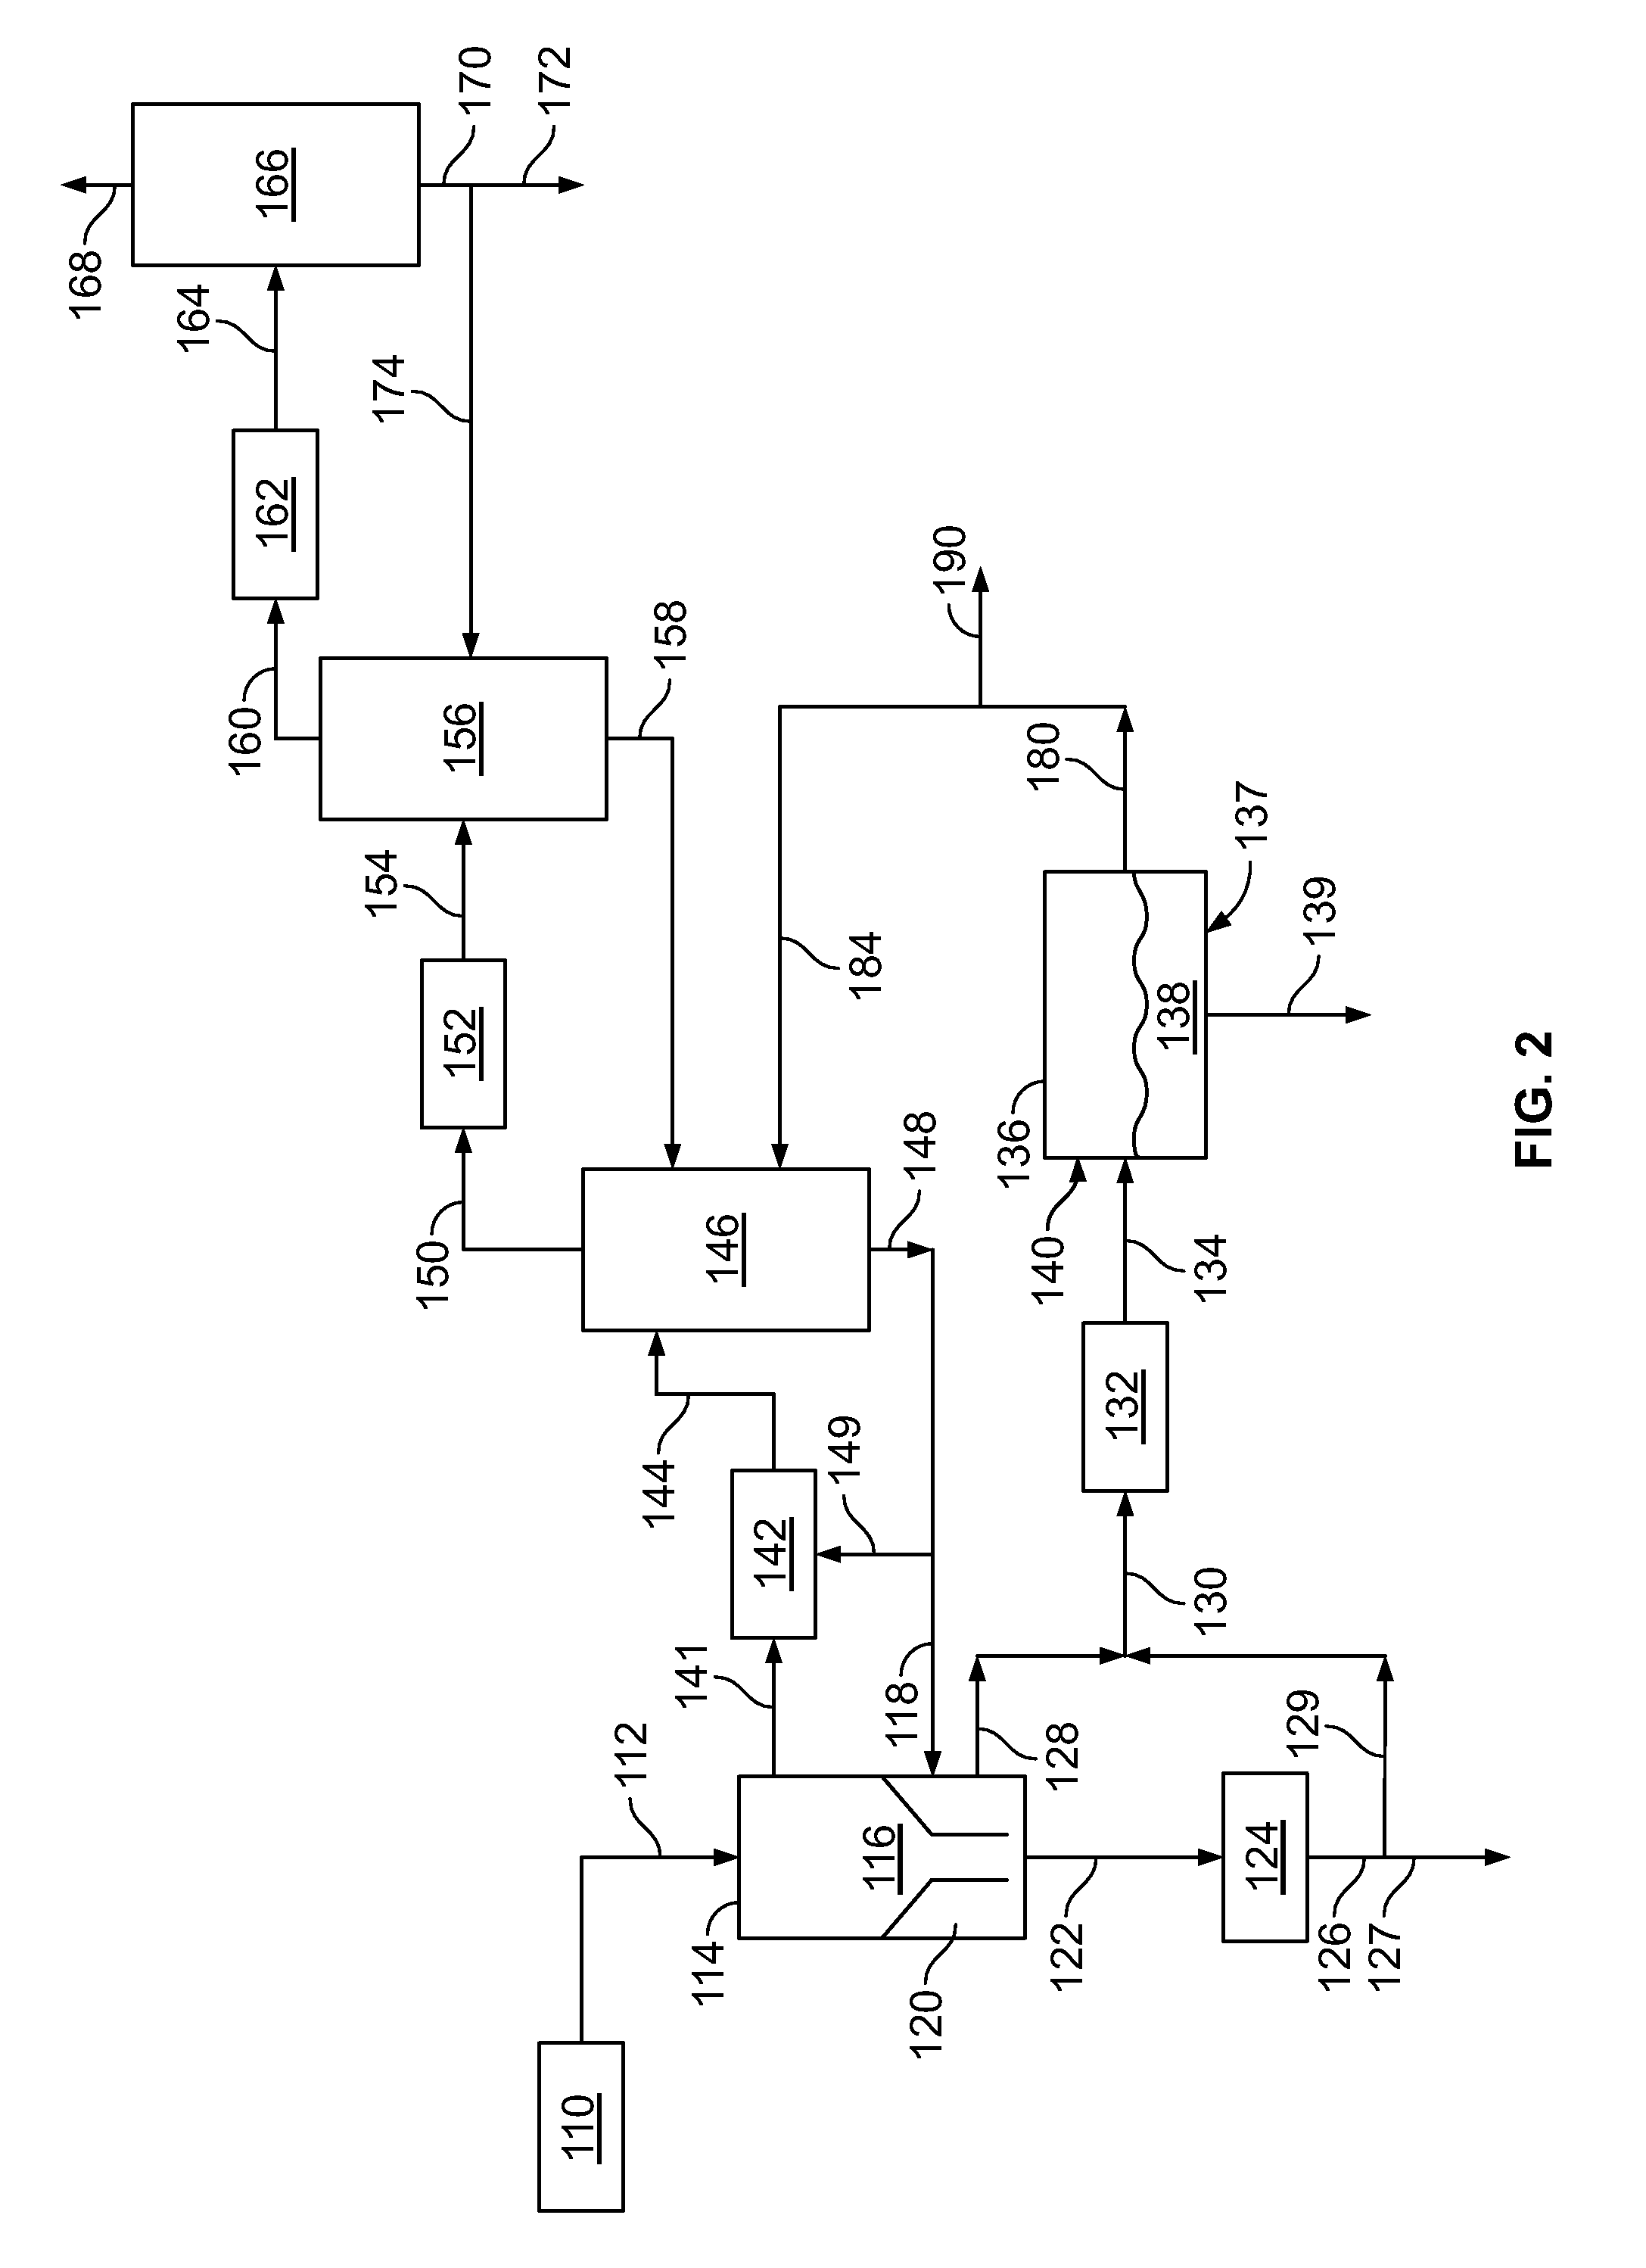 Methods for removing suspended solids from a gasification process stream